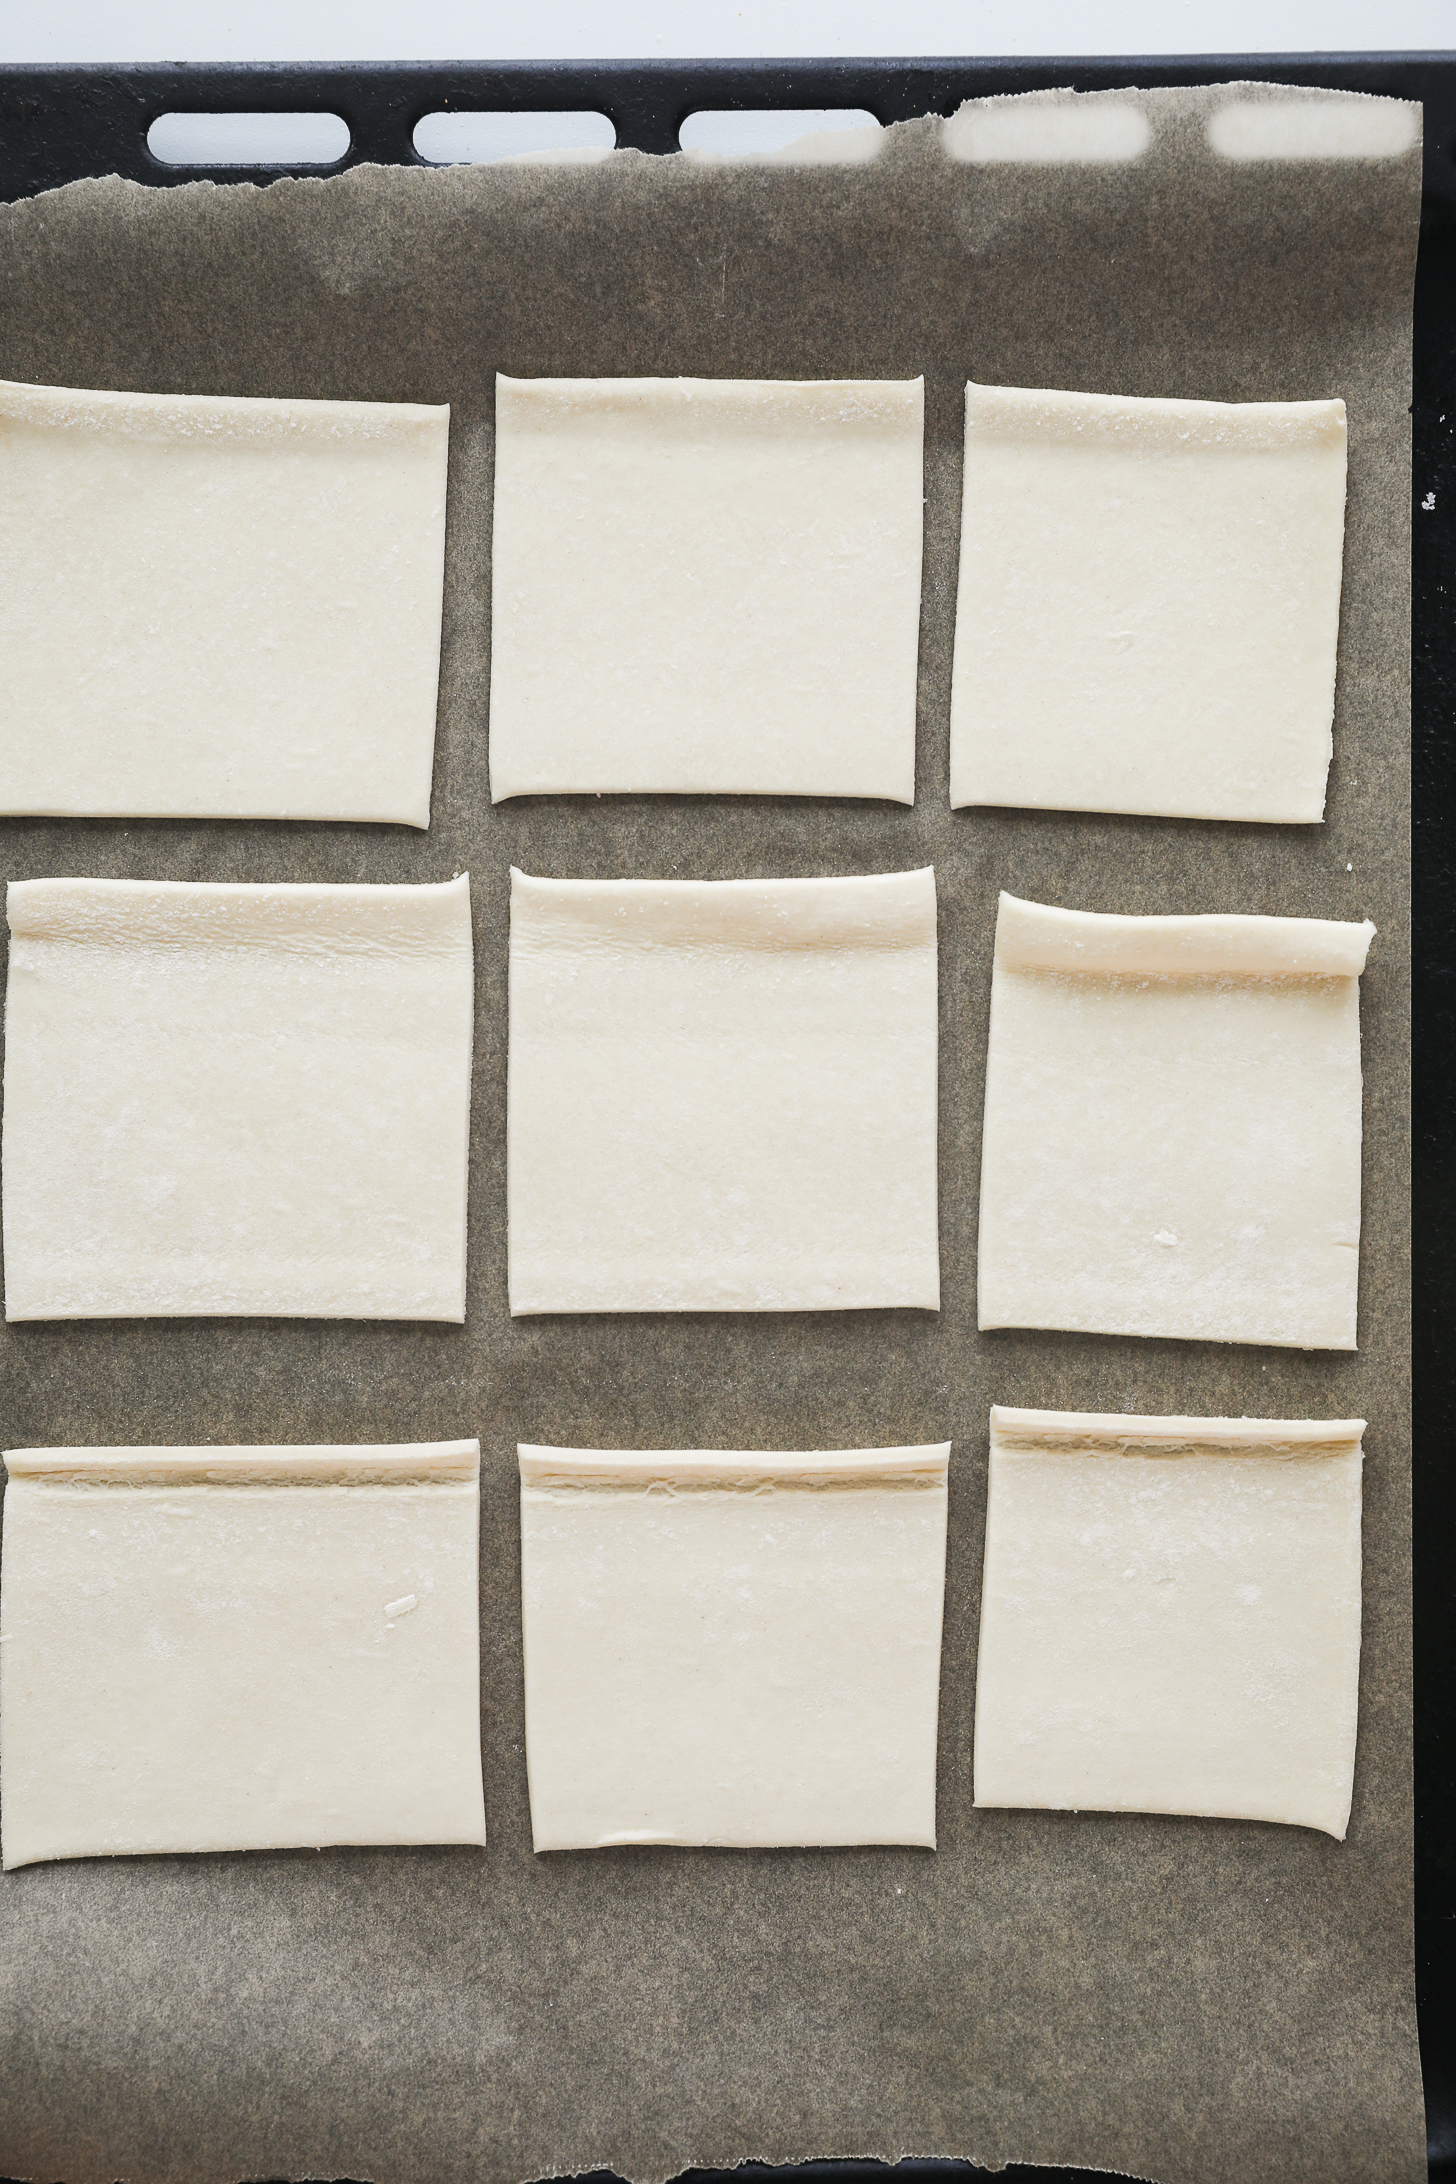 Top-down view of nine unbaked puff pastry squares arranged on a lined baking tray.